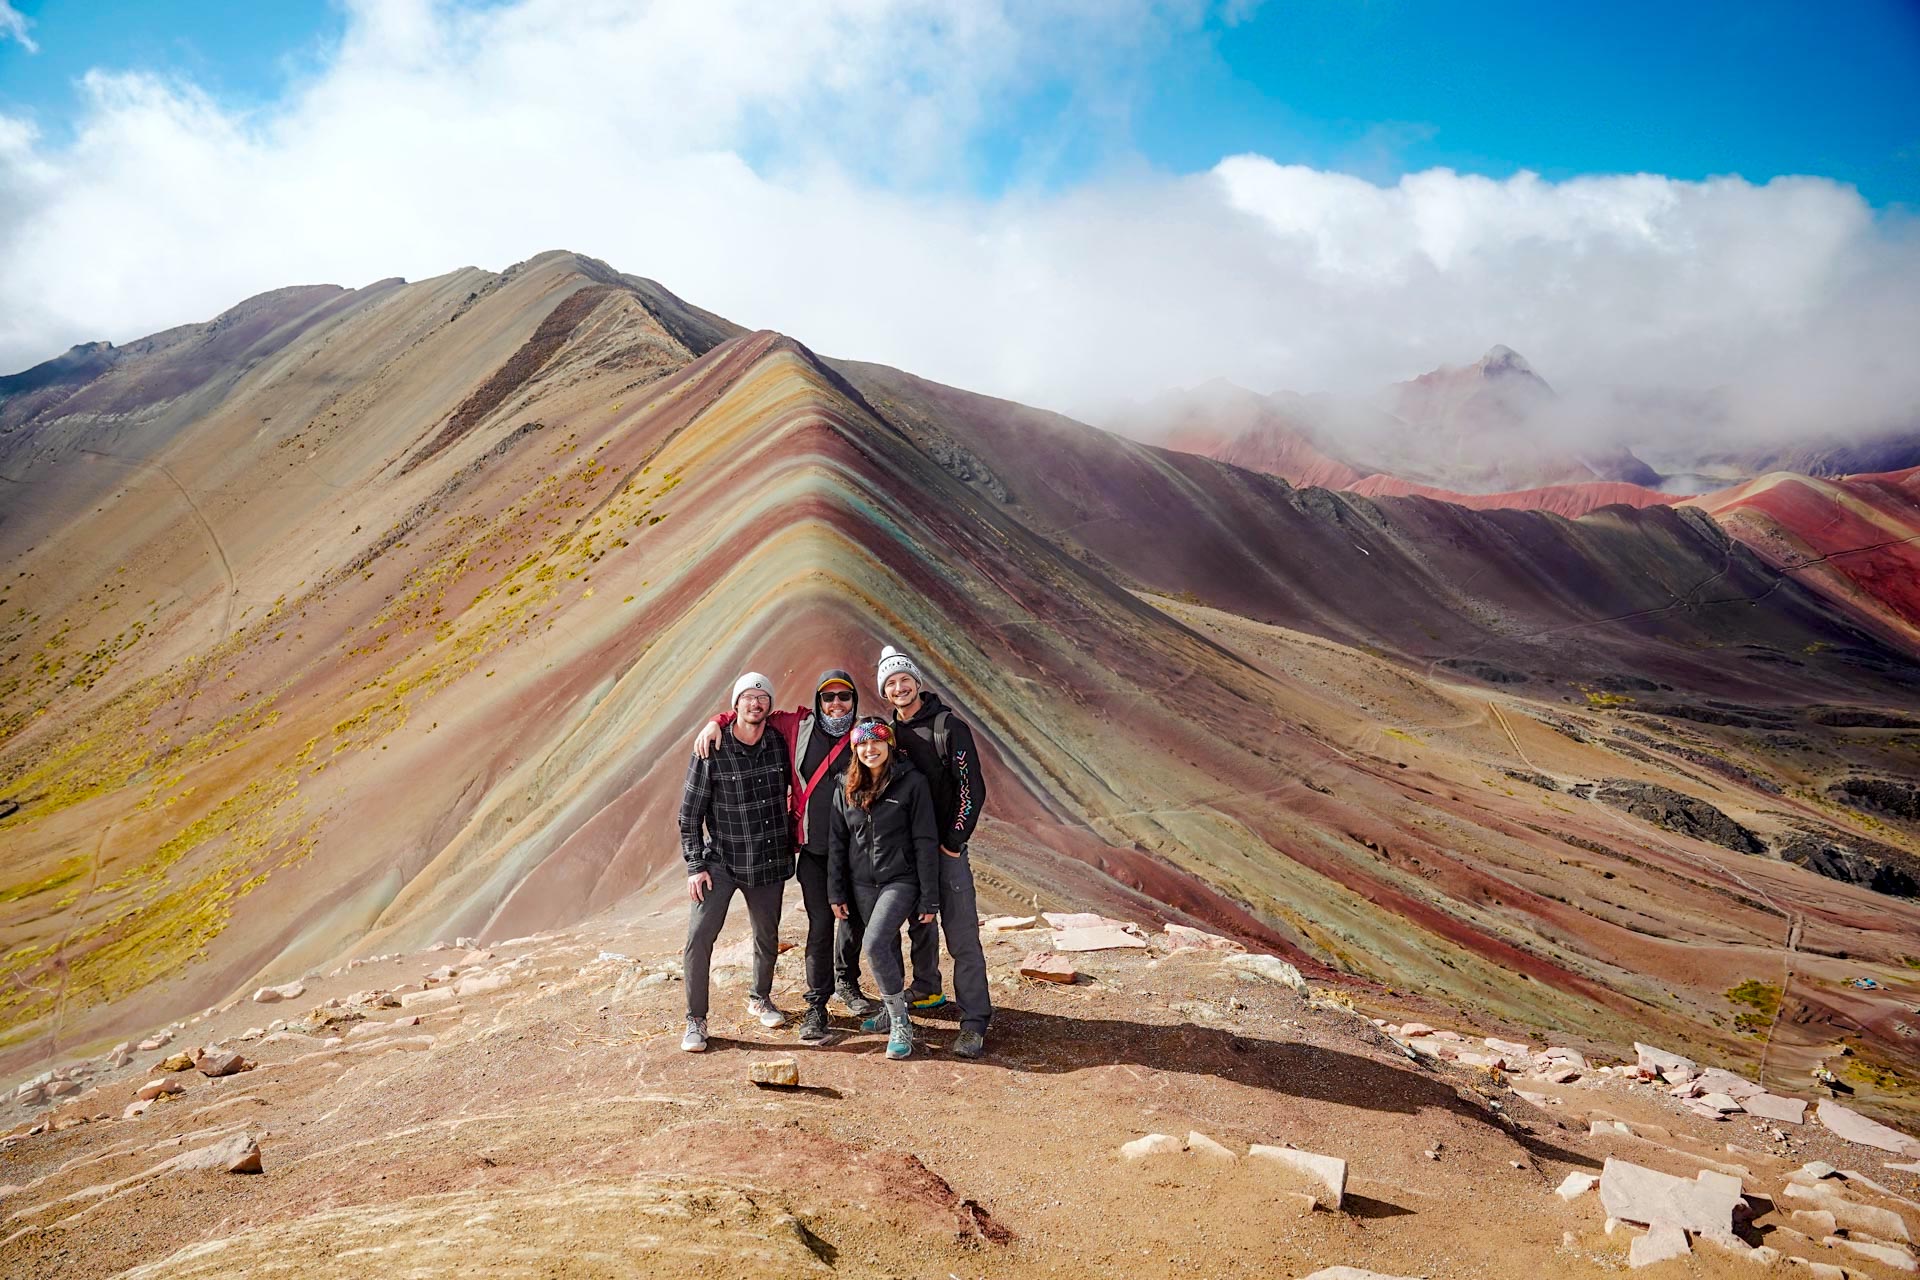 “Rainbow Mountain in peru: Complete guide by local expert”